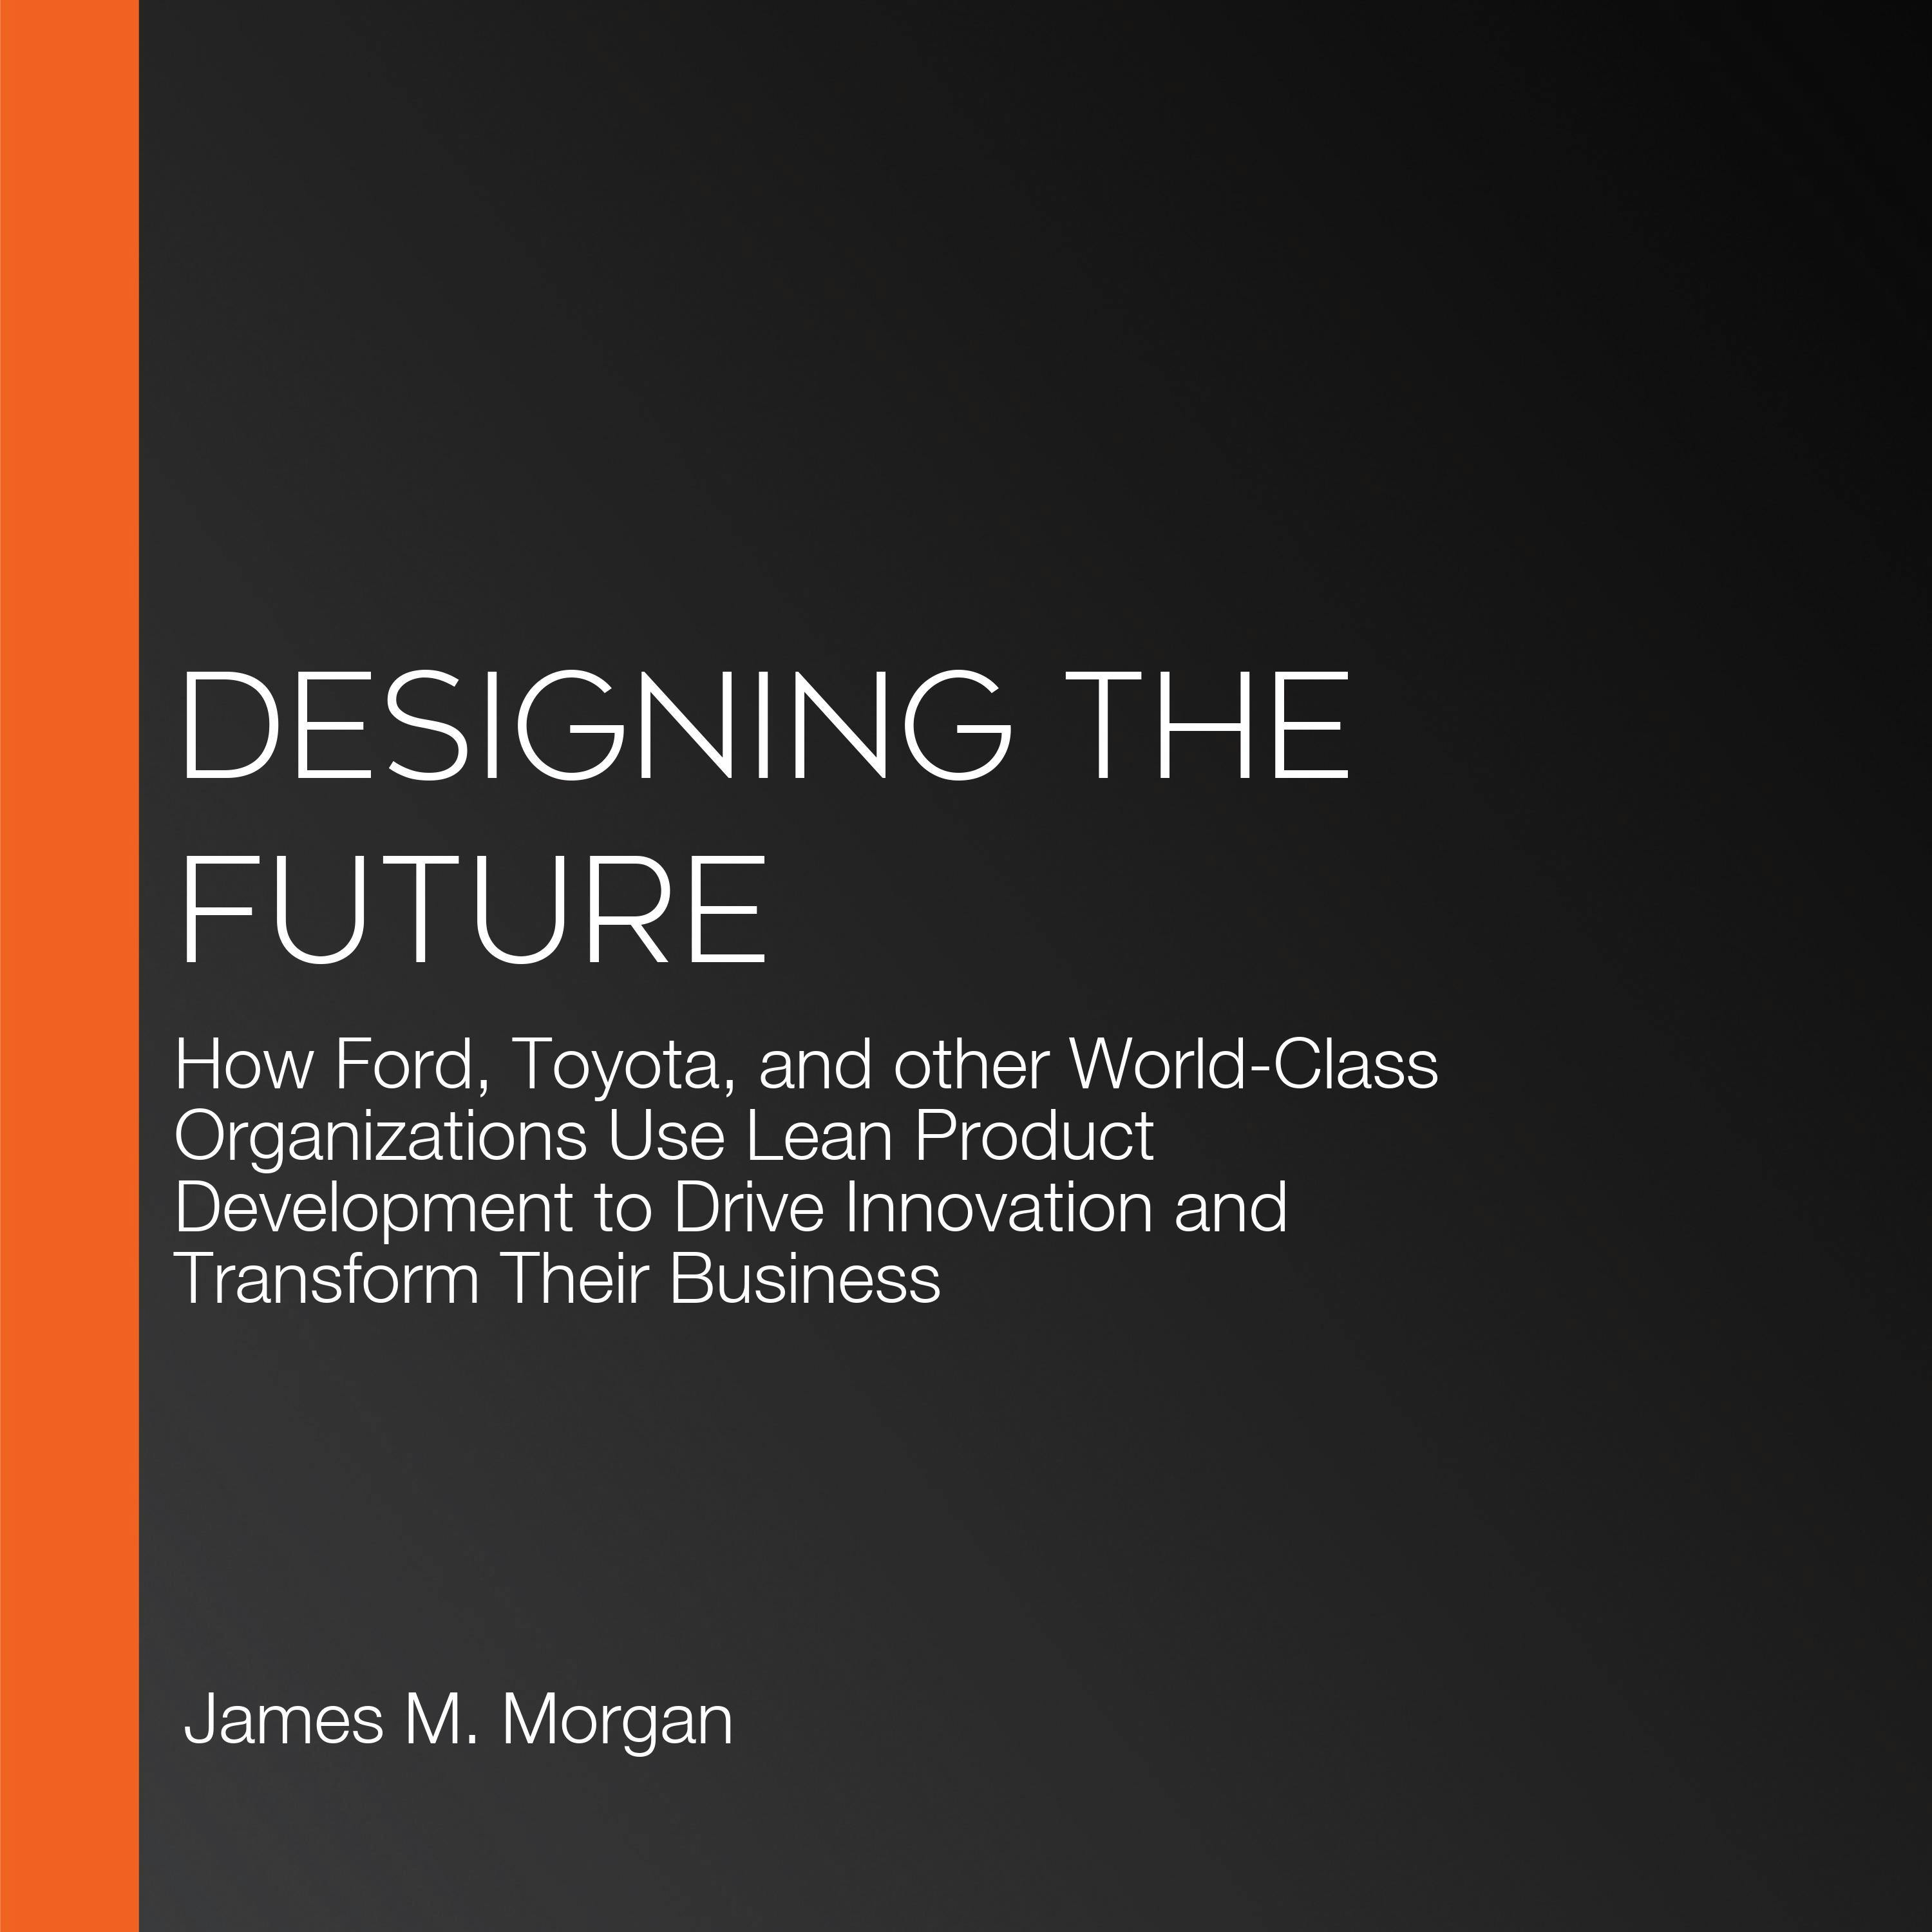 Designing the Future: How Ford, Toyota, and other World-Class Organizations Use Lean Product Development to Drive Innovation and Transform Their Business - Jeffrey K. Liker, James M. Morgan